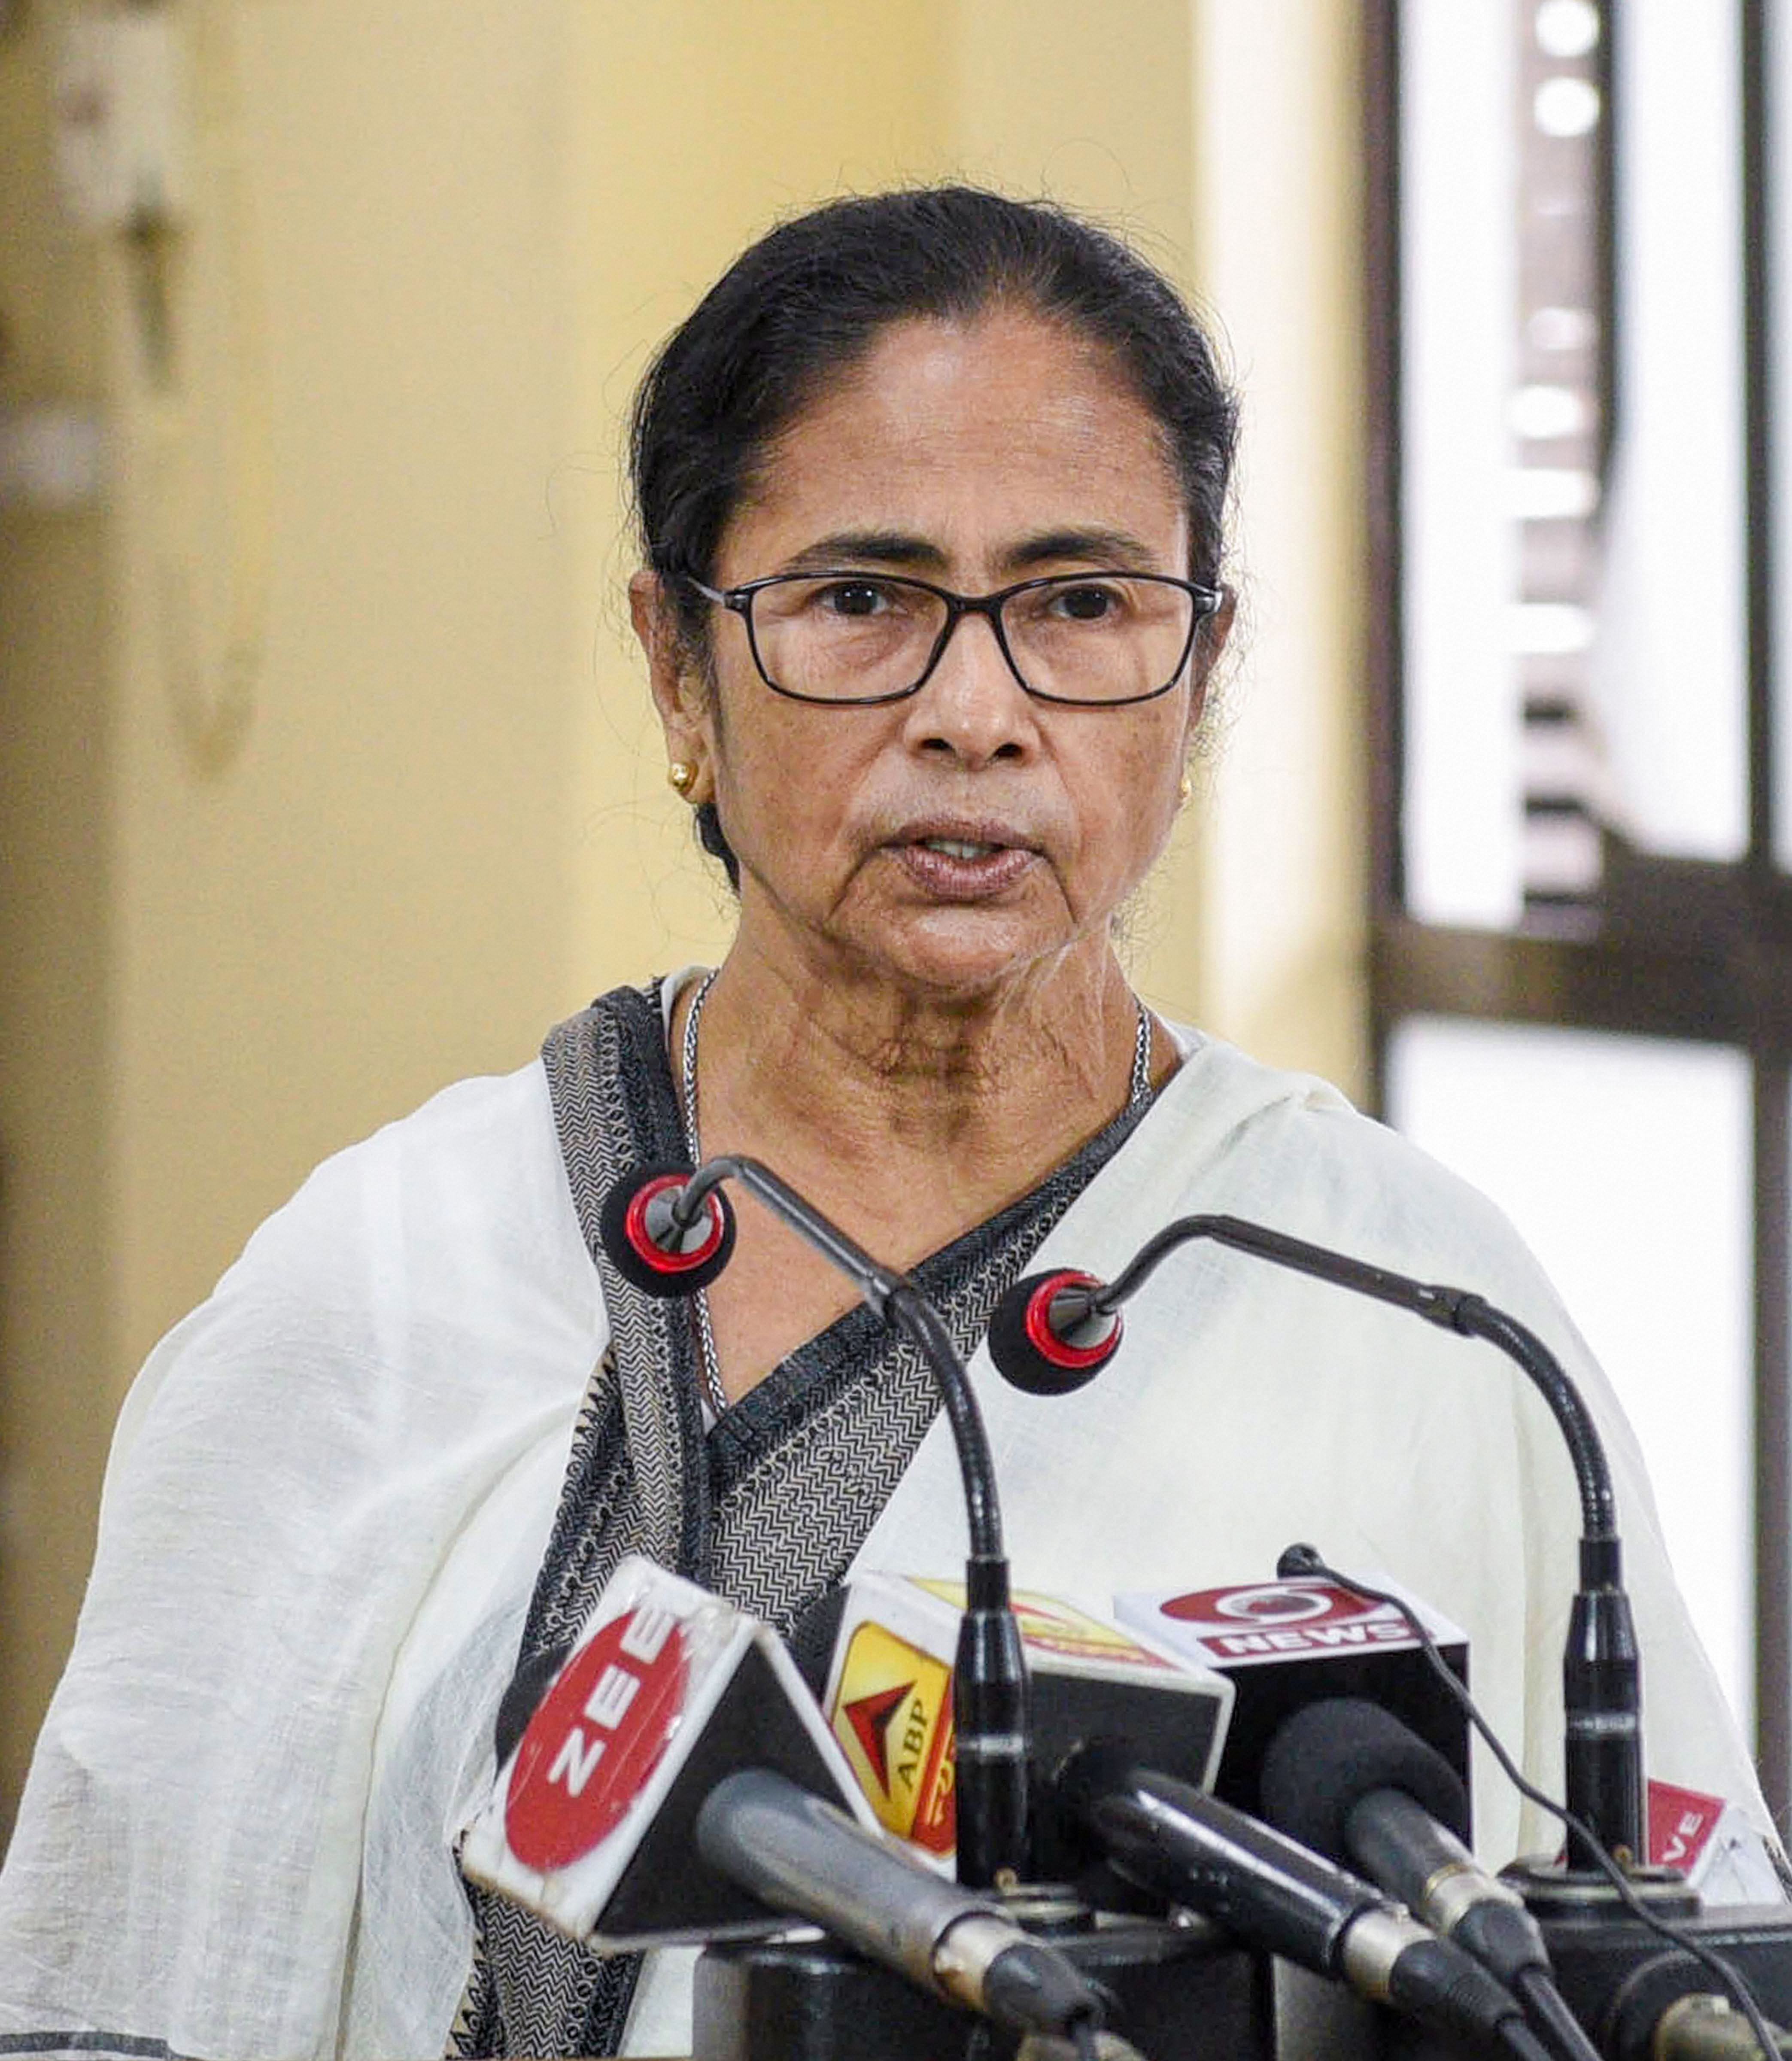 Holding a meeting with officials of all sports bodies of the state, Banerjee took stock of the situation and urged them to postpone all events till March 30 as a precautionary measure. (Credit: PTI Photo)